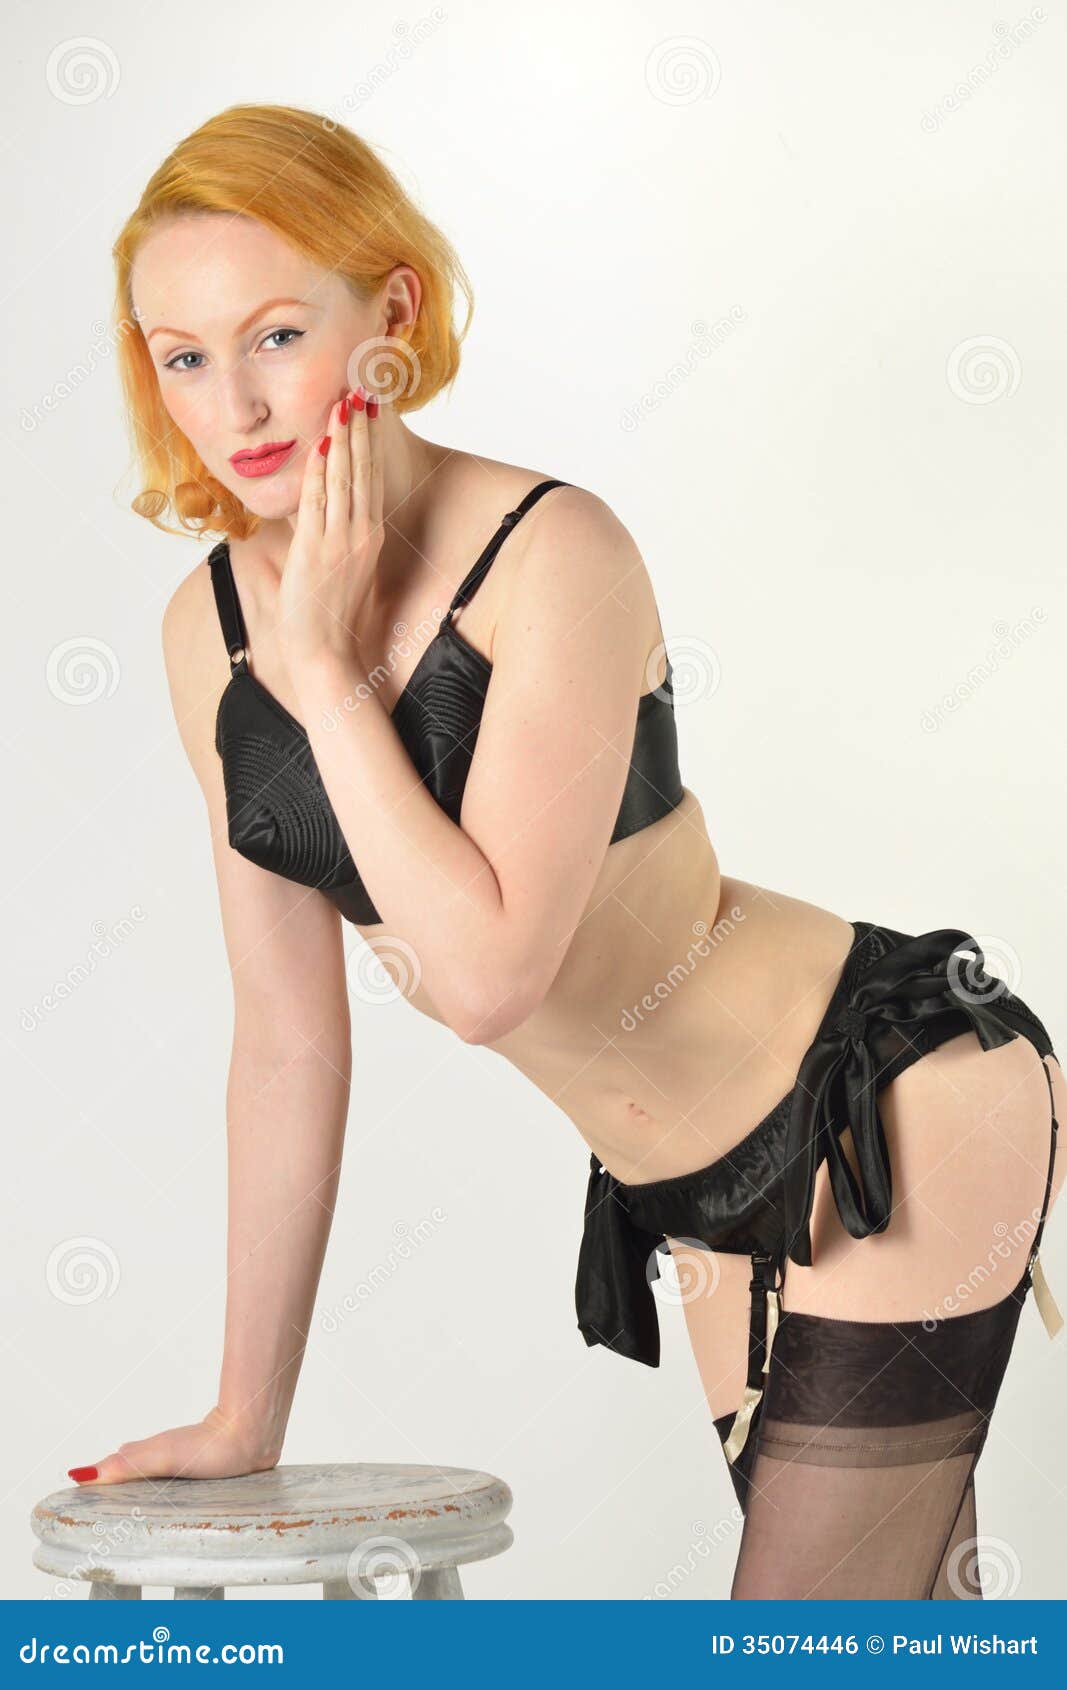 Pin Up Girl Leaning On Stool Royalty Free Stock Image